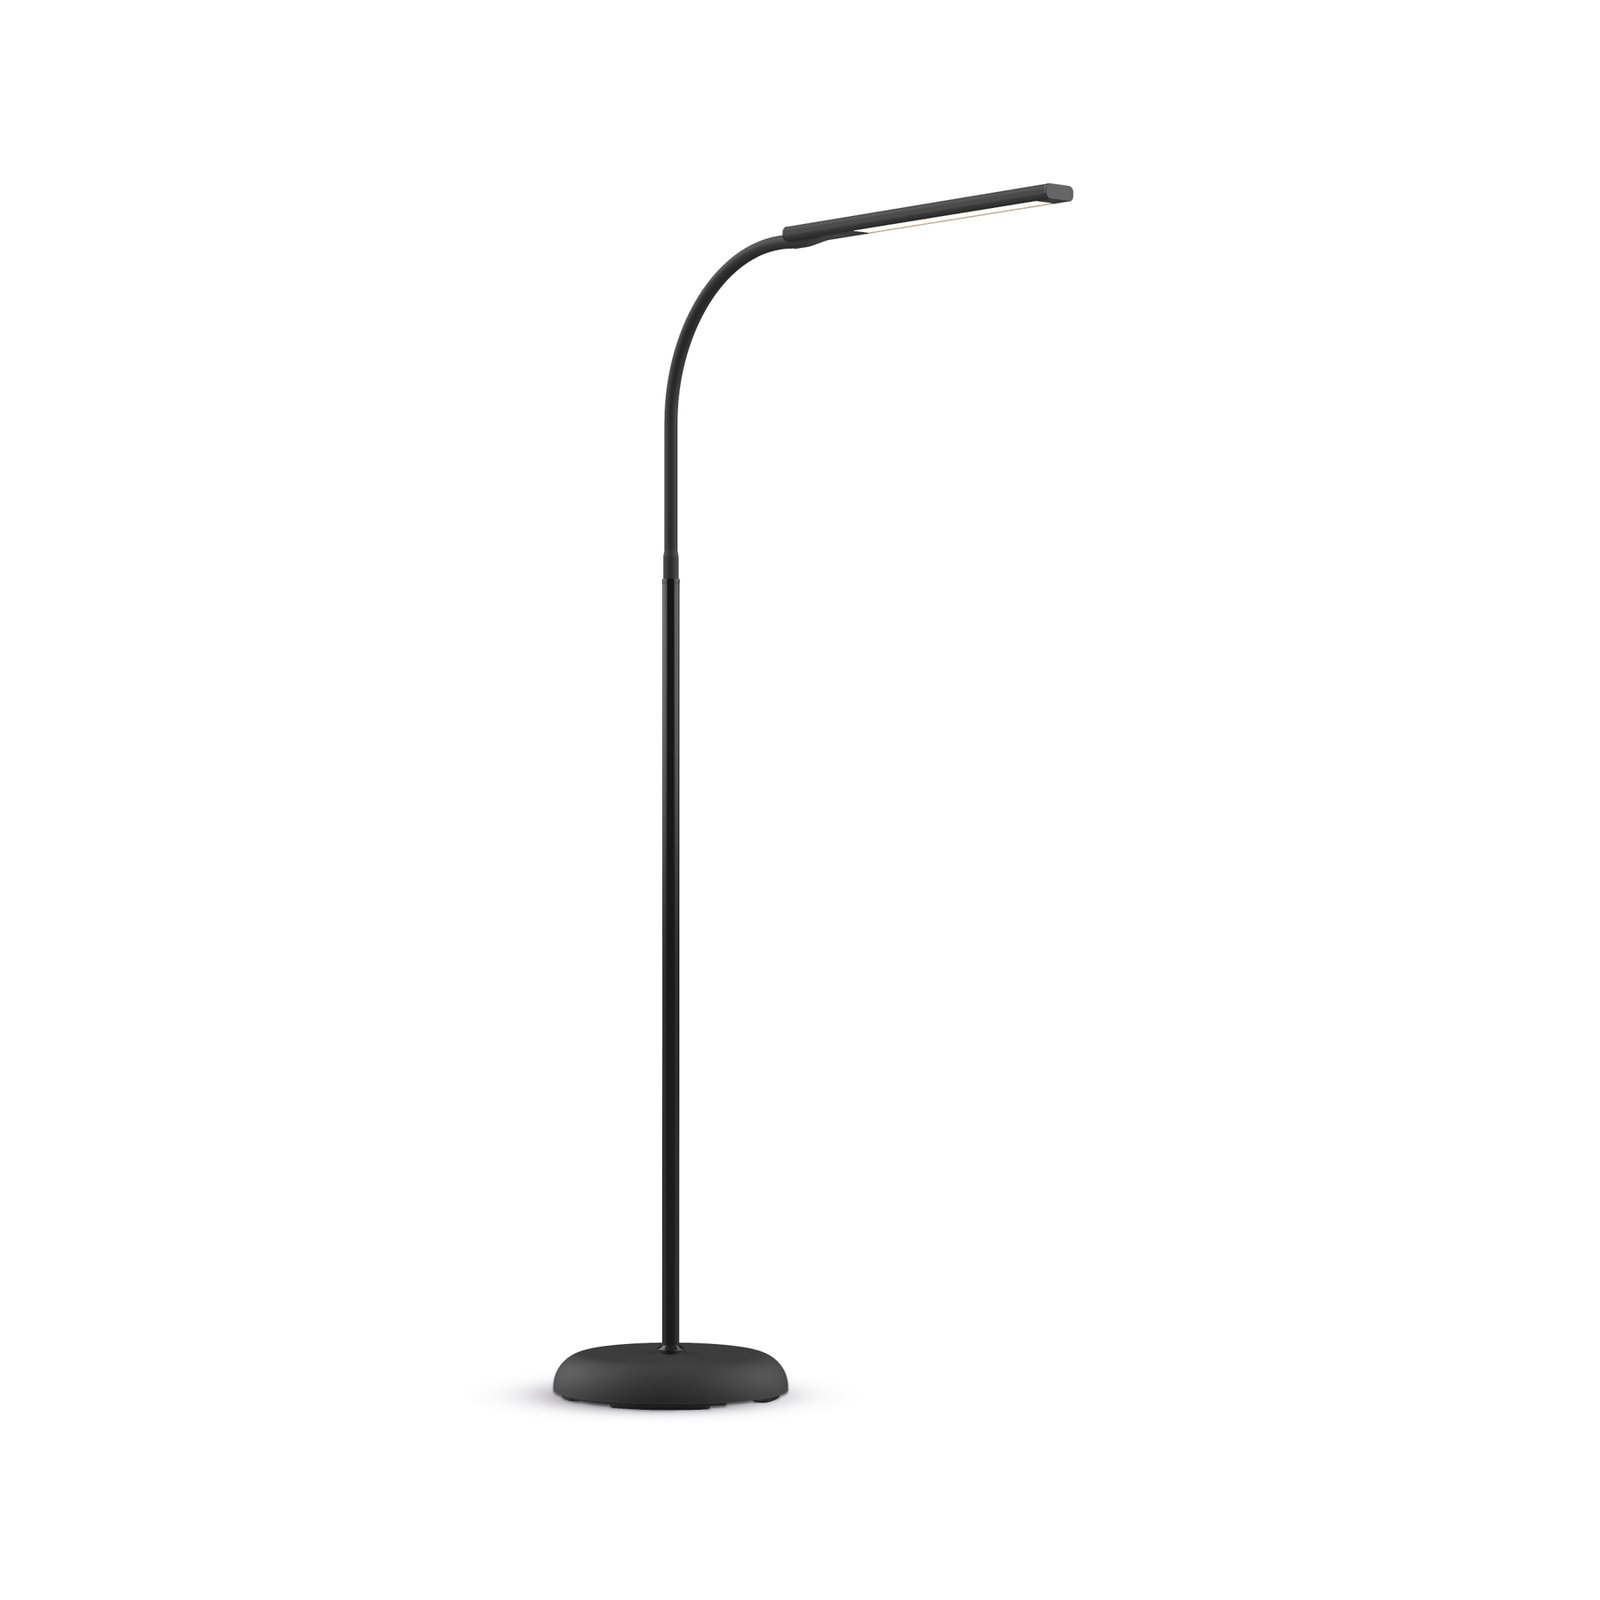 Lampadaire LED MAULpirro dimmable, noir